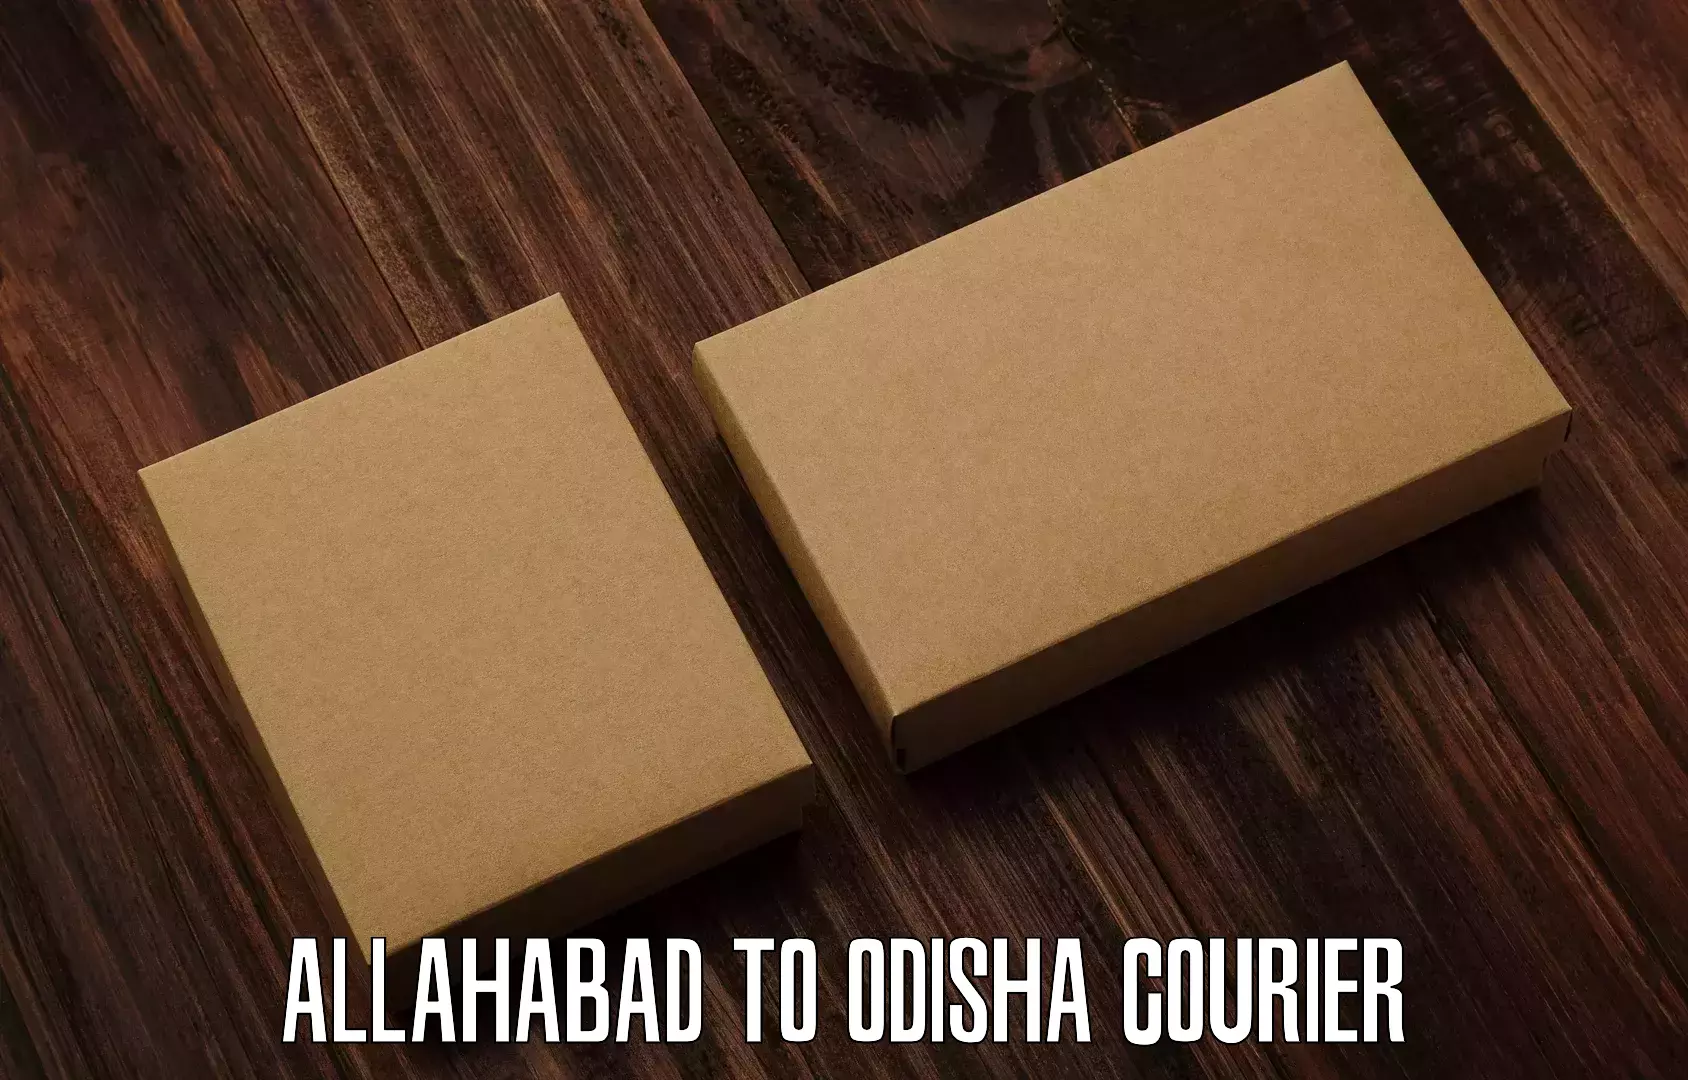 On-call courier service Allahabad to Dandisahi